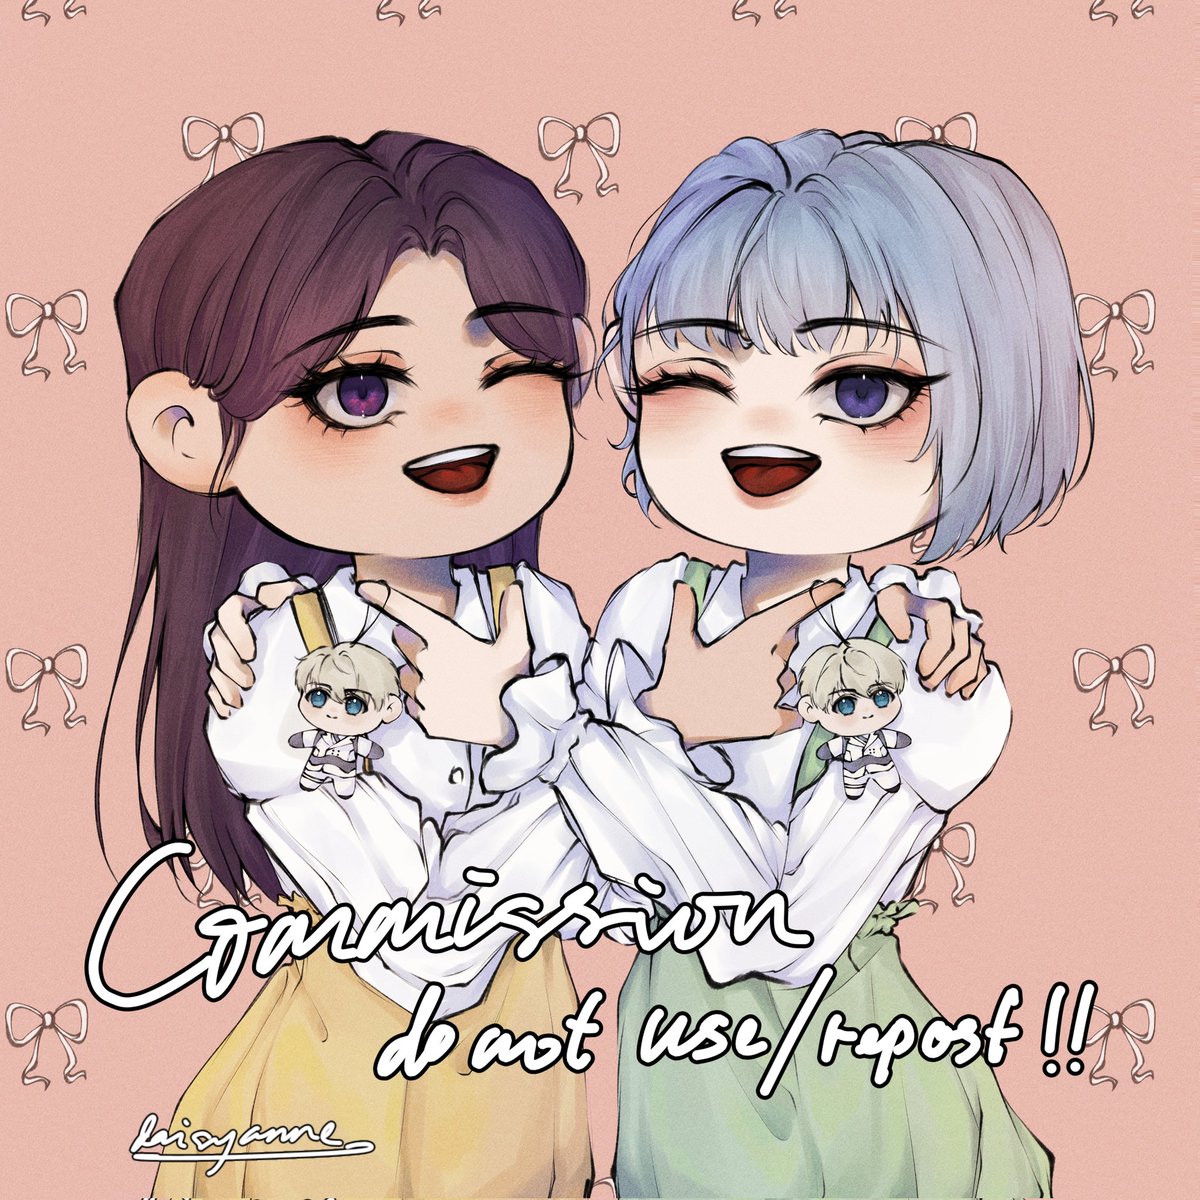 Commission result for @/xaviable
Thank you for commissioning me💗💗

Pls do not use or repost❗❗

#artidn #zonakaryaid #commissionart